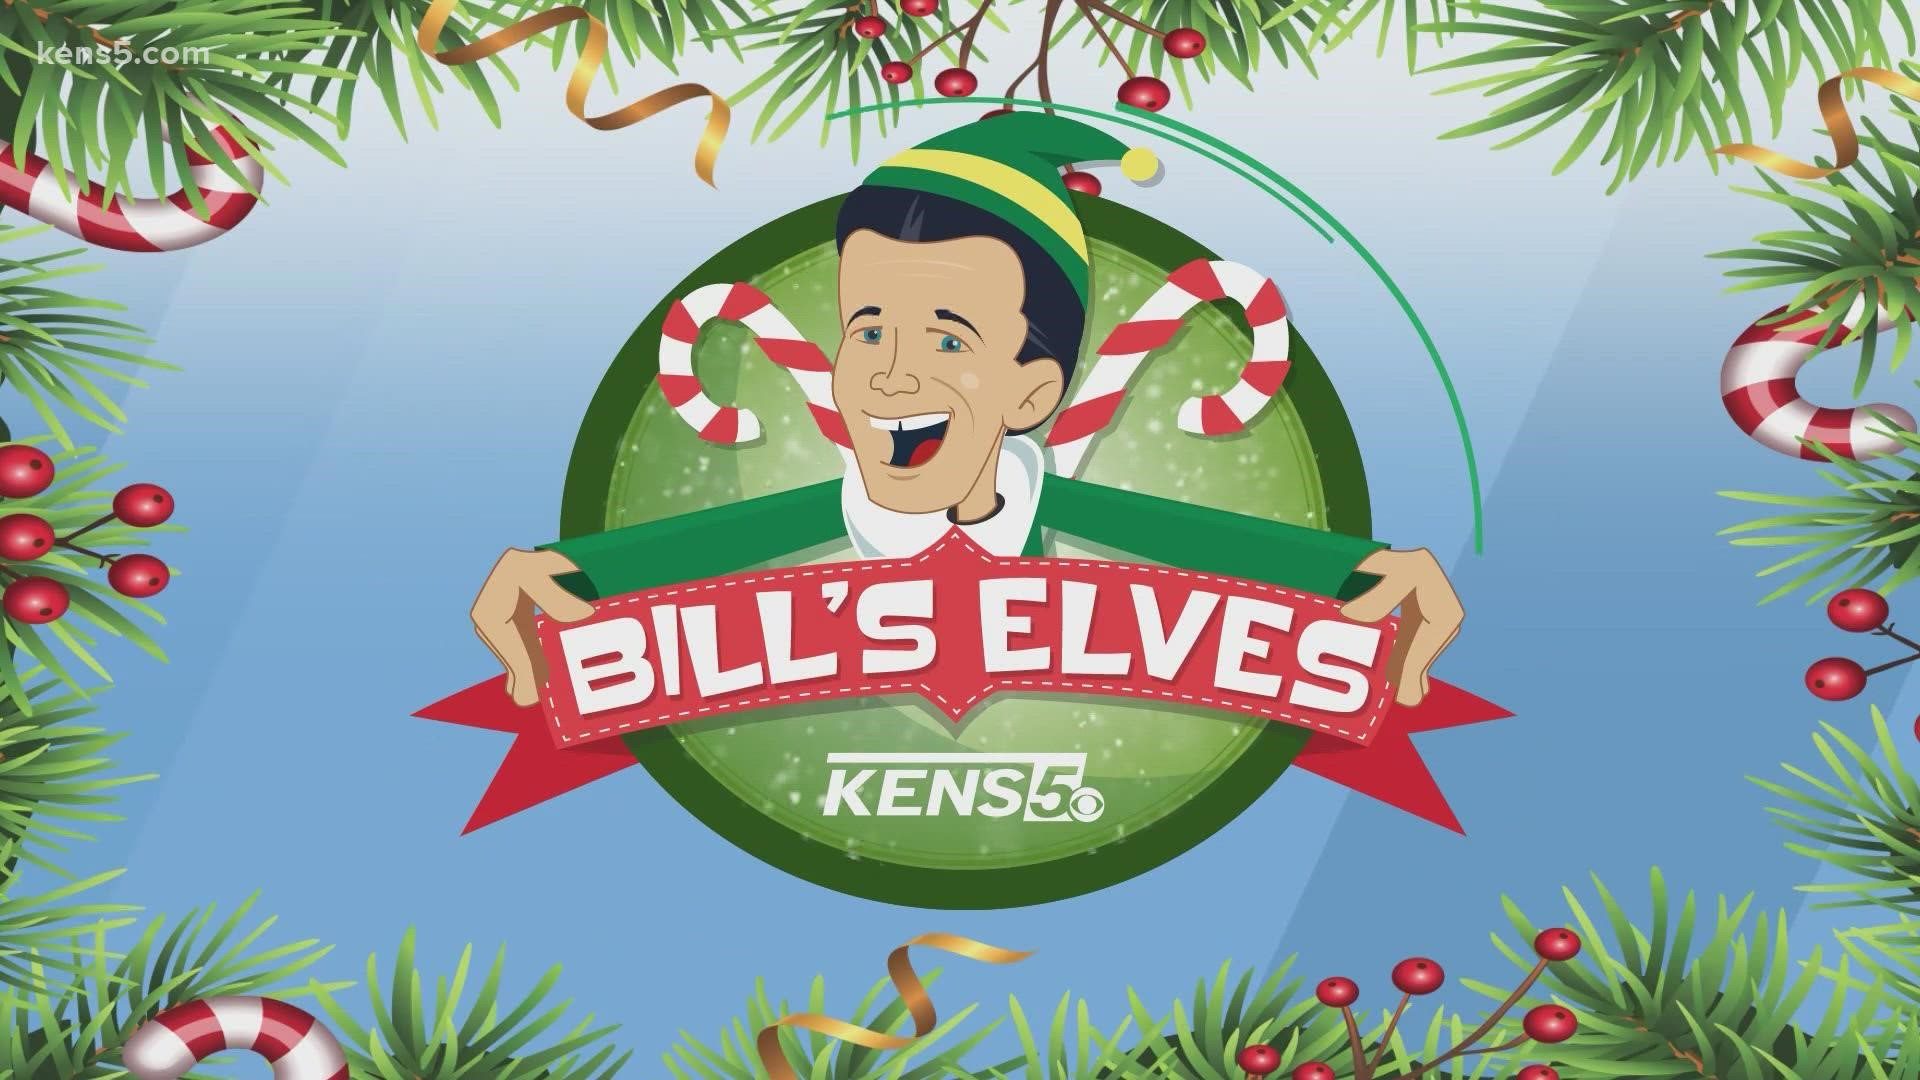 If you want to help, KENS 5 is hosting a phone bank on Thursday, Dec. 4 from 4 to 6:30 p.m. You can find more information at kens5.com/billselves.